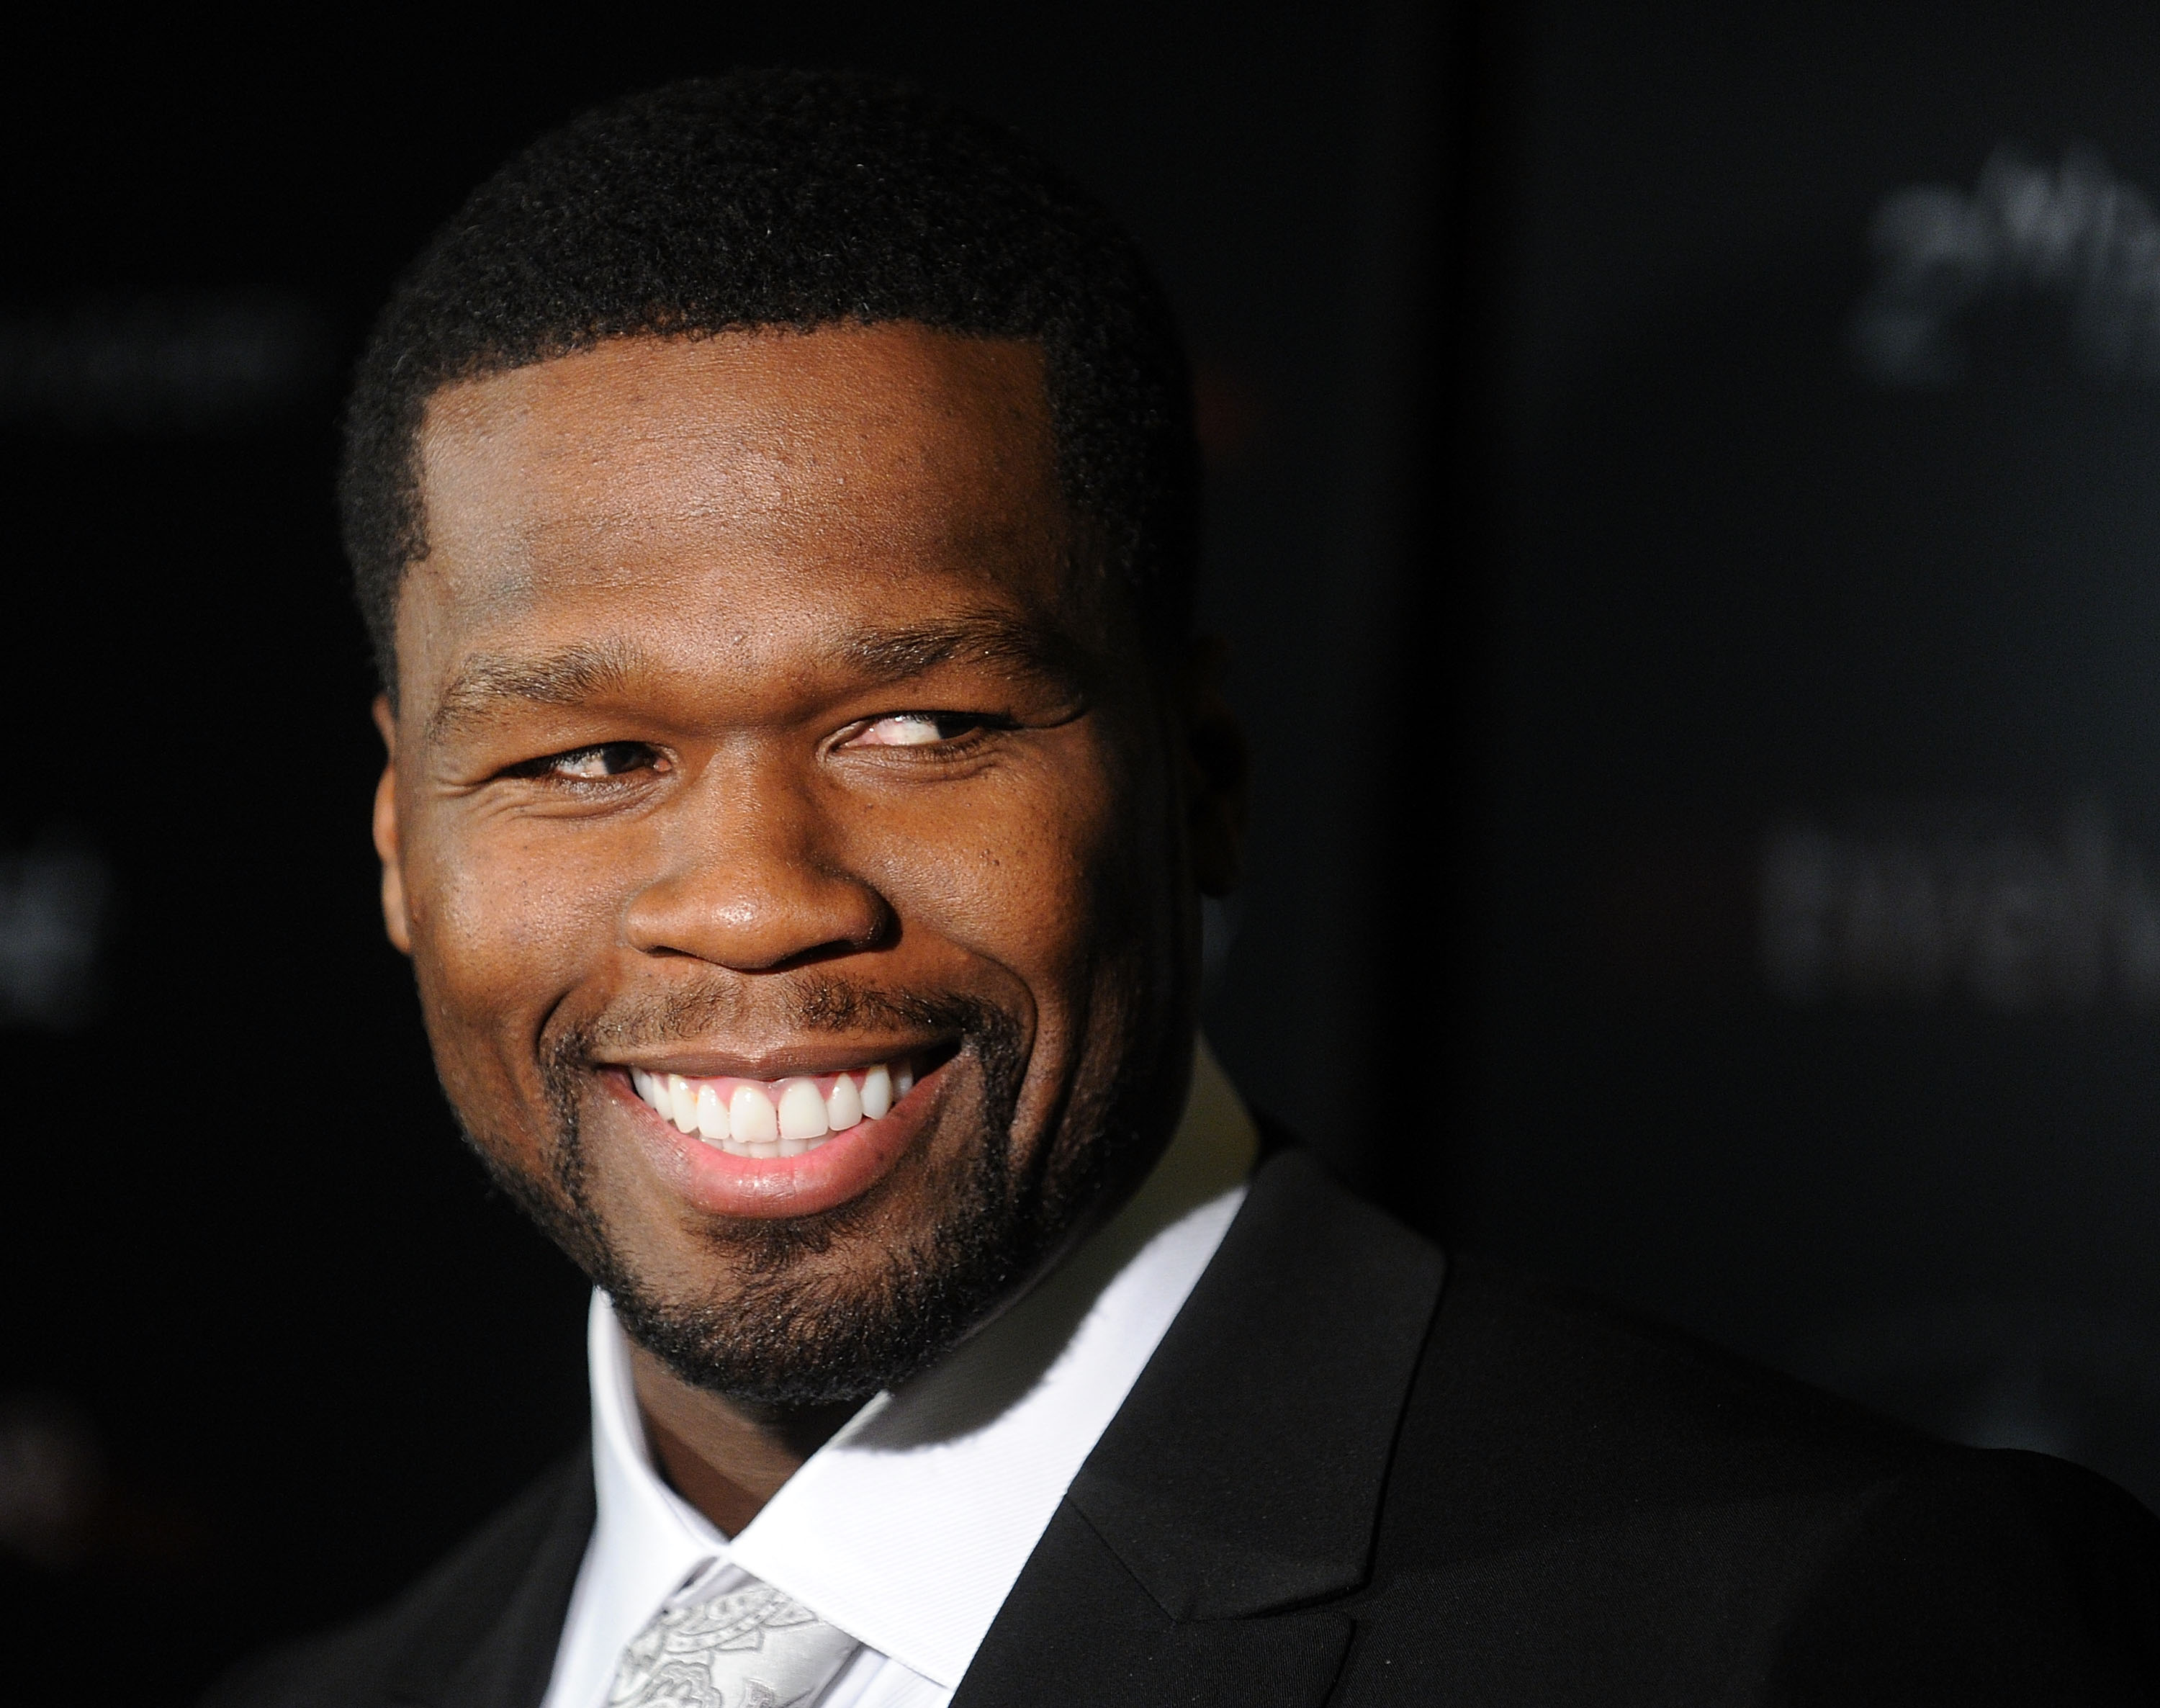 50 Cent wearing a suit and tie